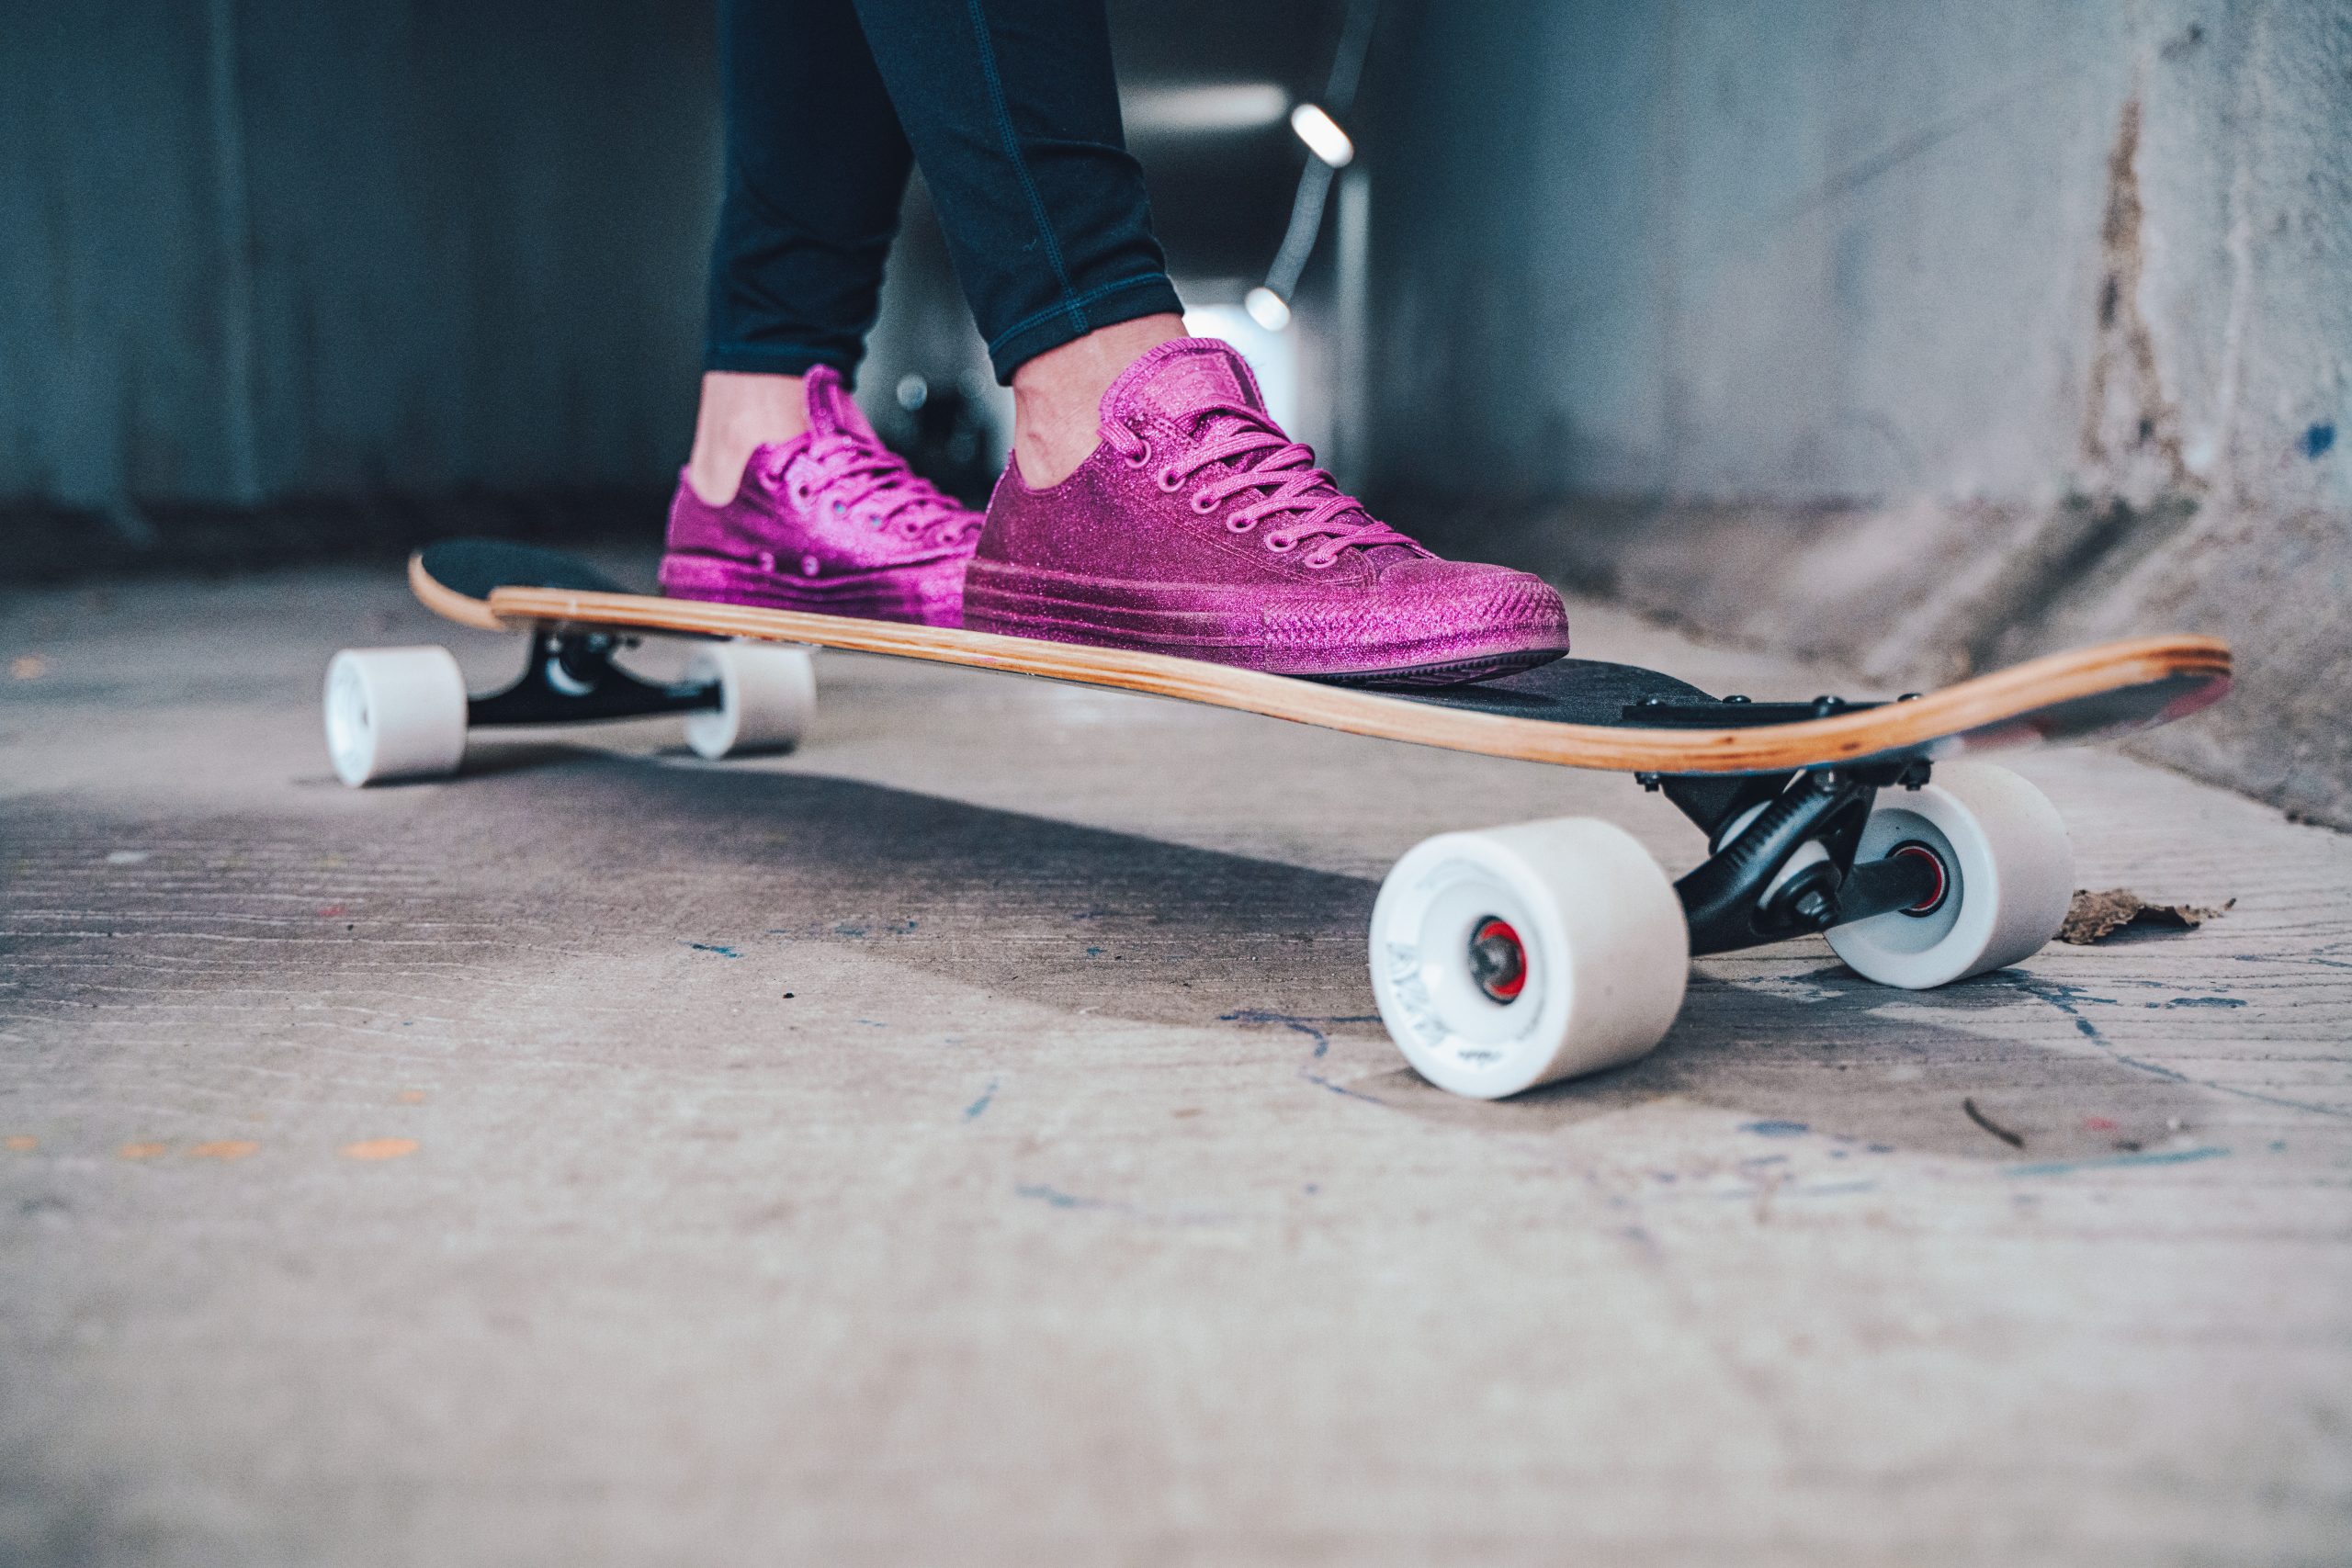 Image of a skateboarder wearing jeans and pink shoes riding a black skateboard with white wheels. Source: chris haws, unsplash